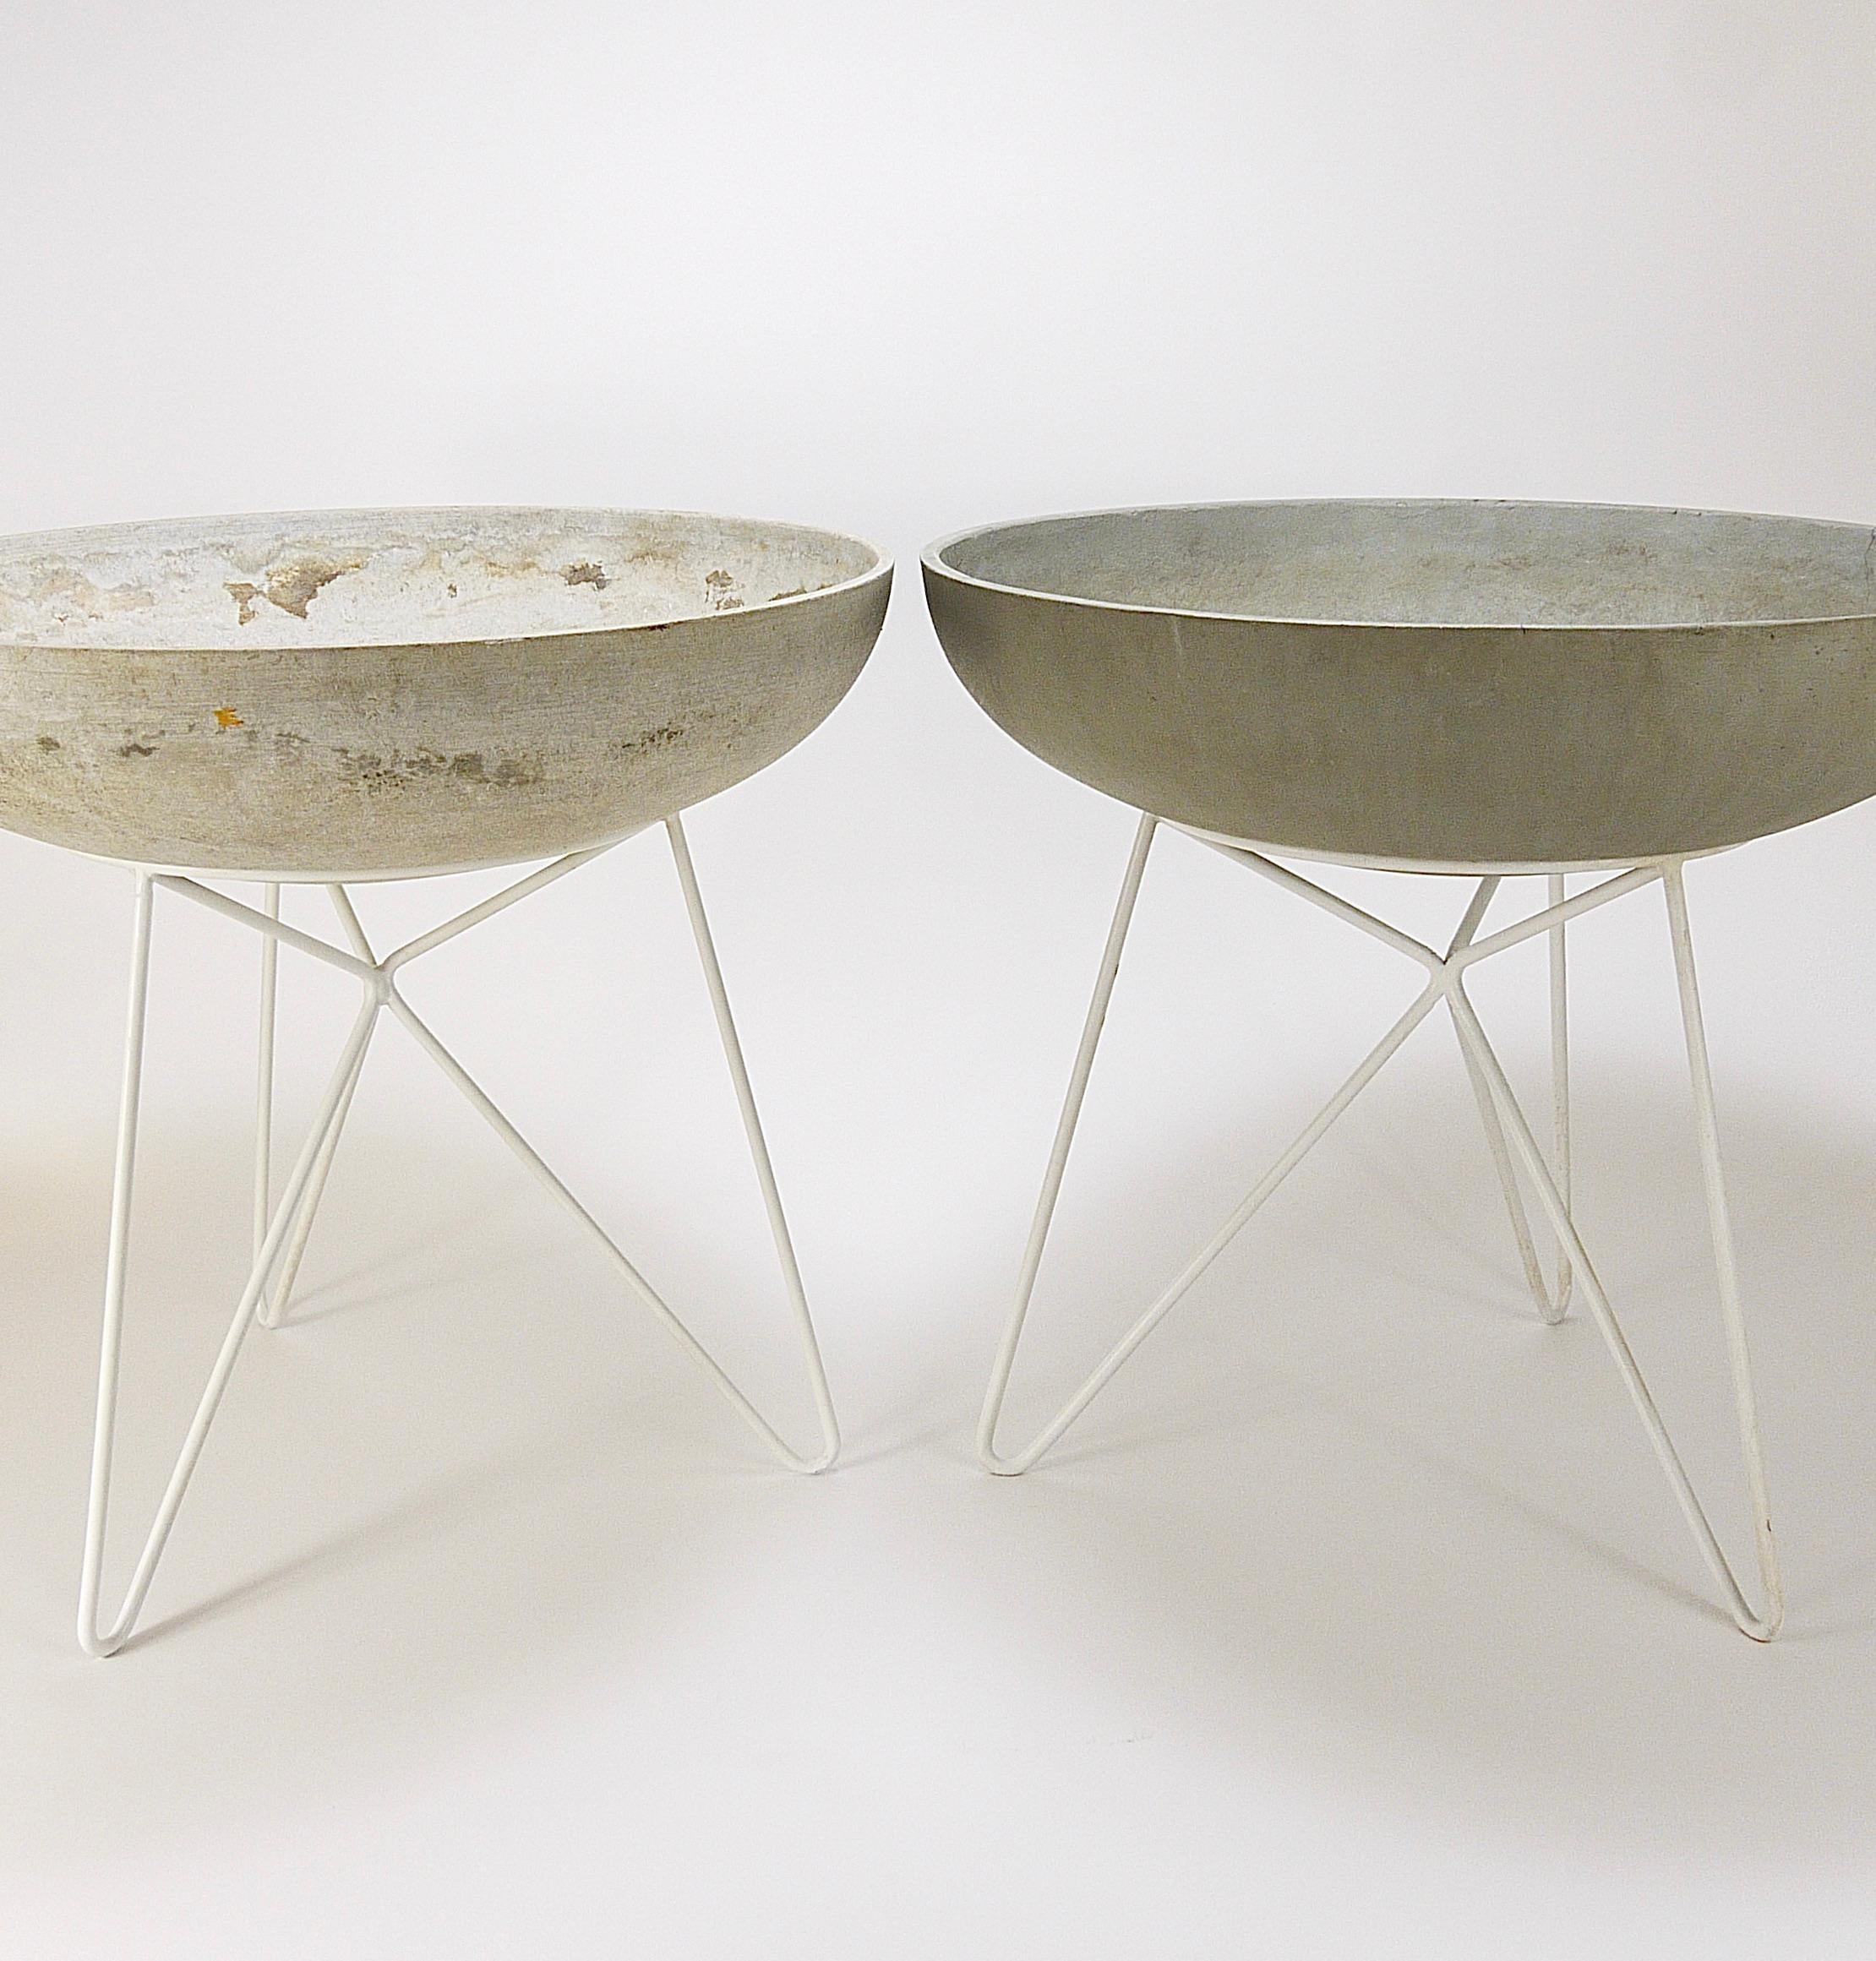 Up to two beautiful round large  21 1/2 in. diameter Midcentury concrete bowl planters / fiber cement saucer flower pots with white painted iron tripod hairpin leg stands from the 1950s by Eternit of Switzerland. In good condition in original